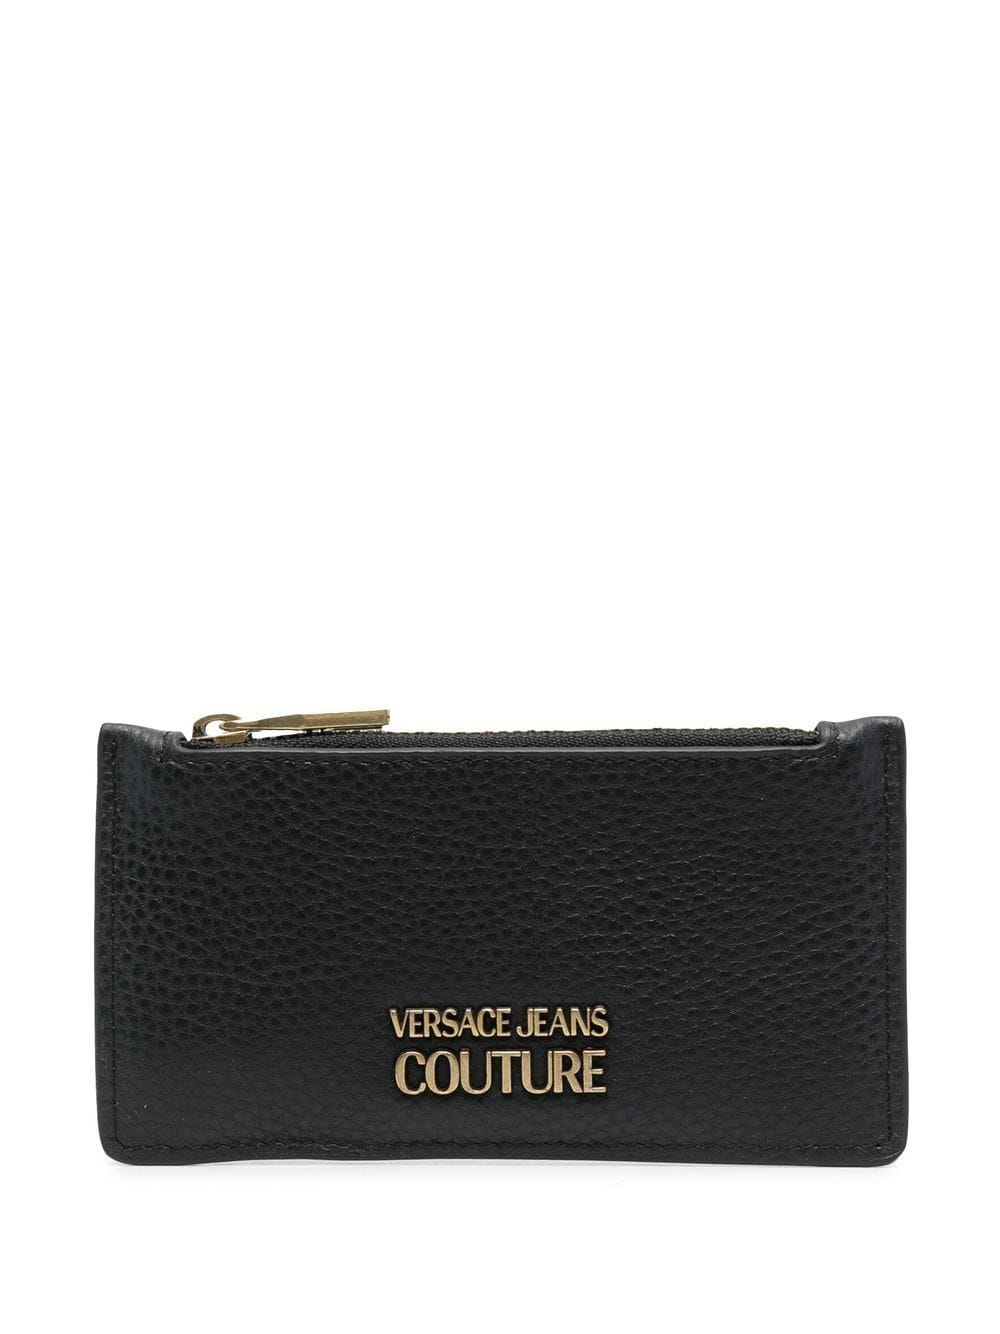 Versace Jeans Couture logo-embellished wallet - Black von Versace Jeans Couture